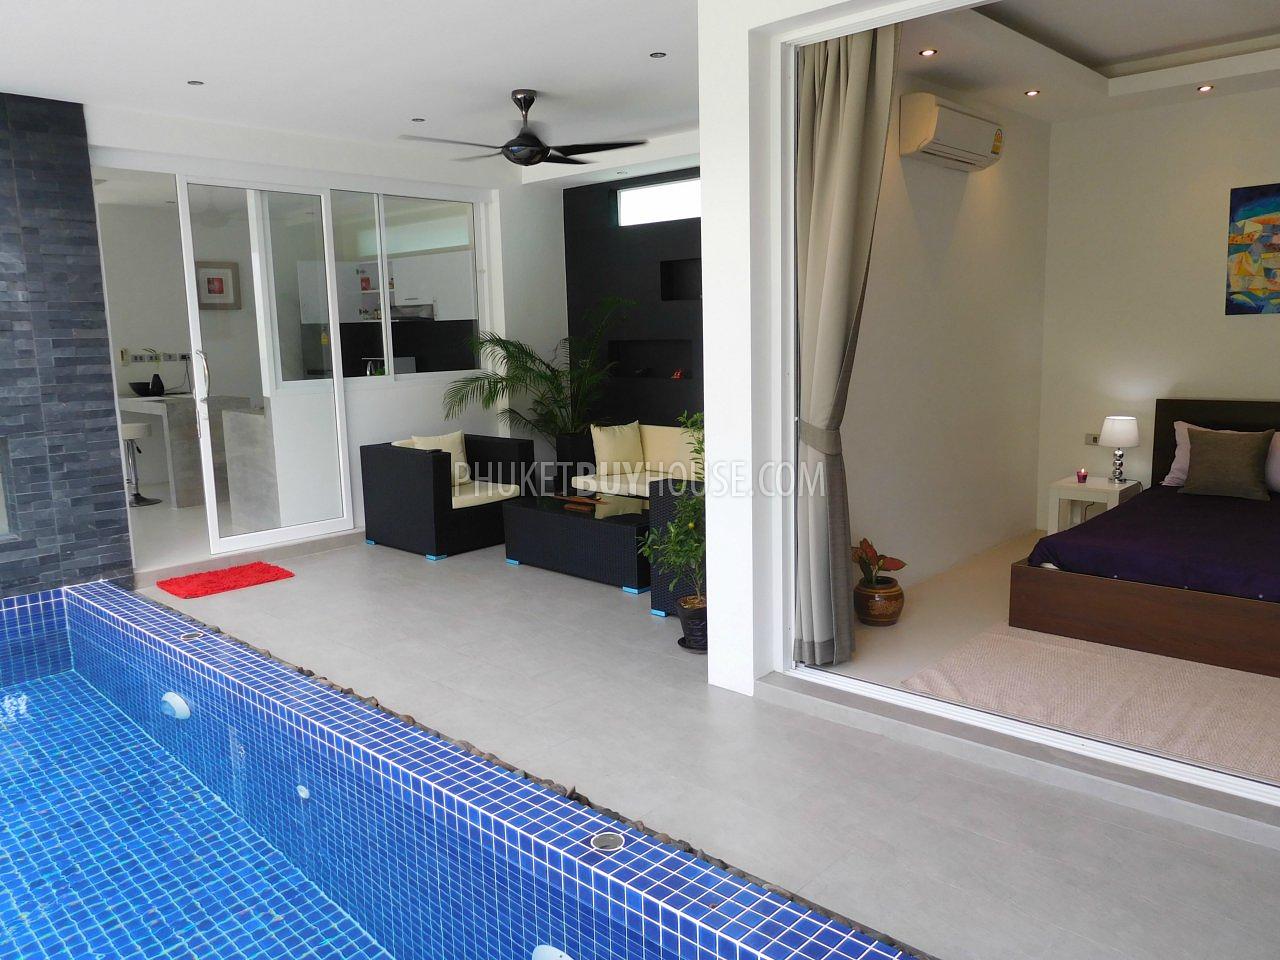 KAM5368: Modern Two-Storey Villa With Private Swimming Pool in Kamala. Photo #8